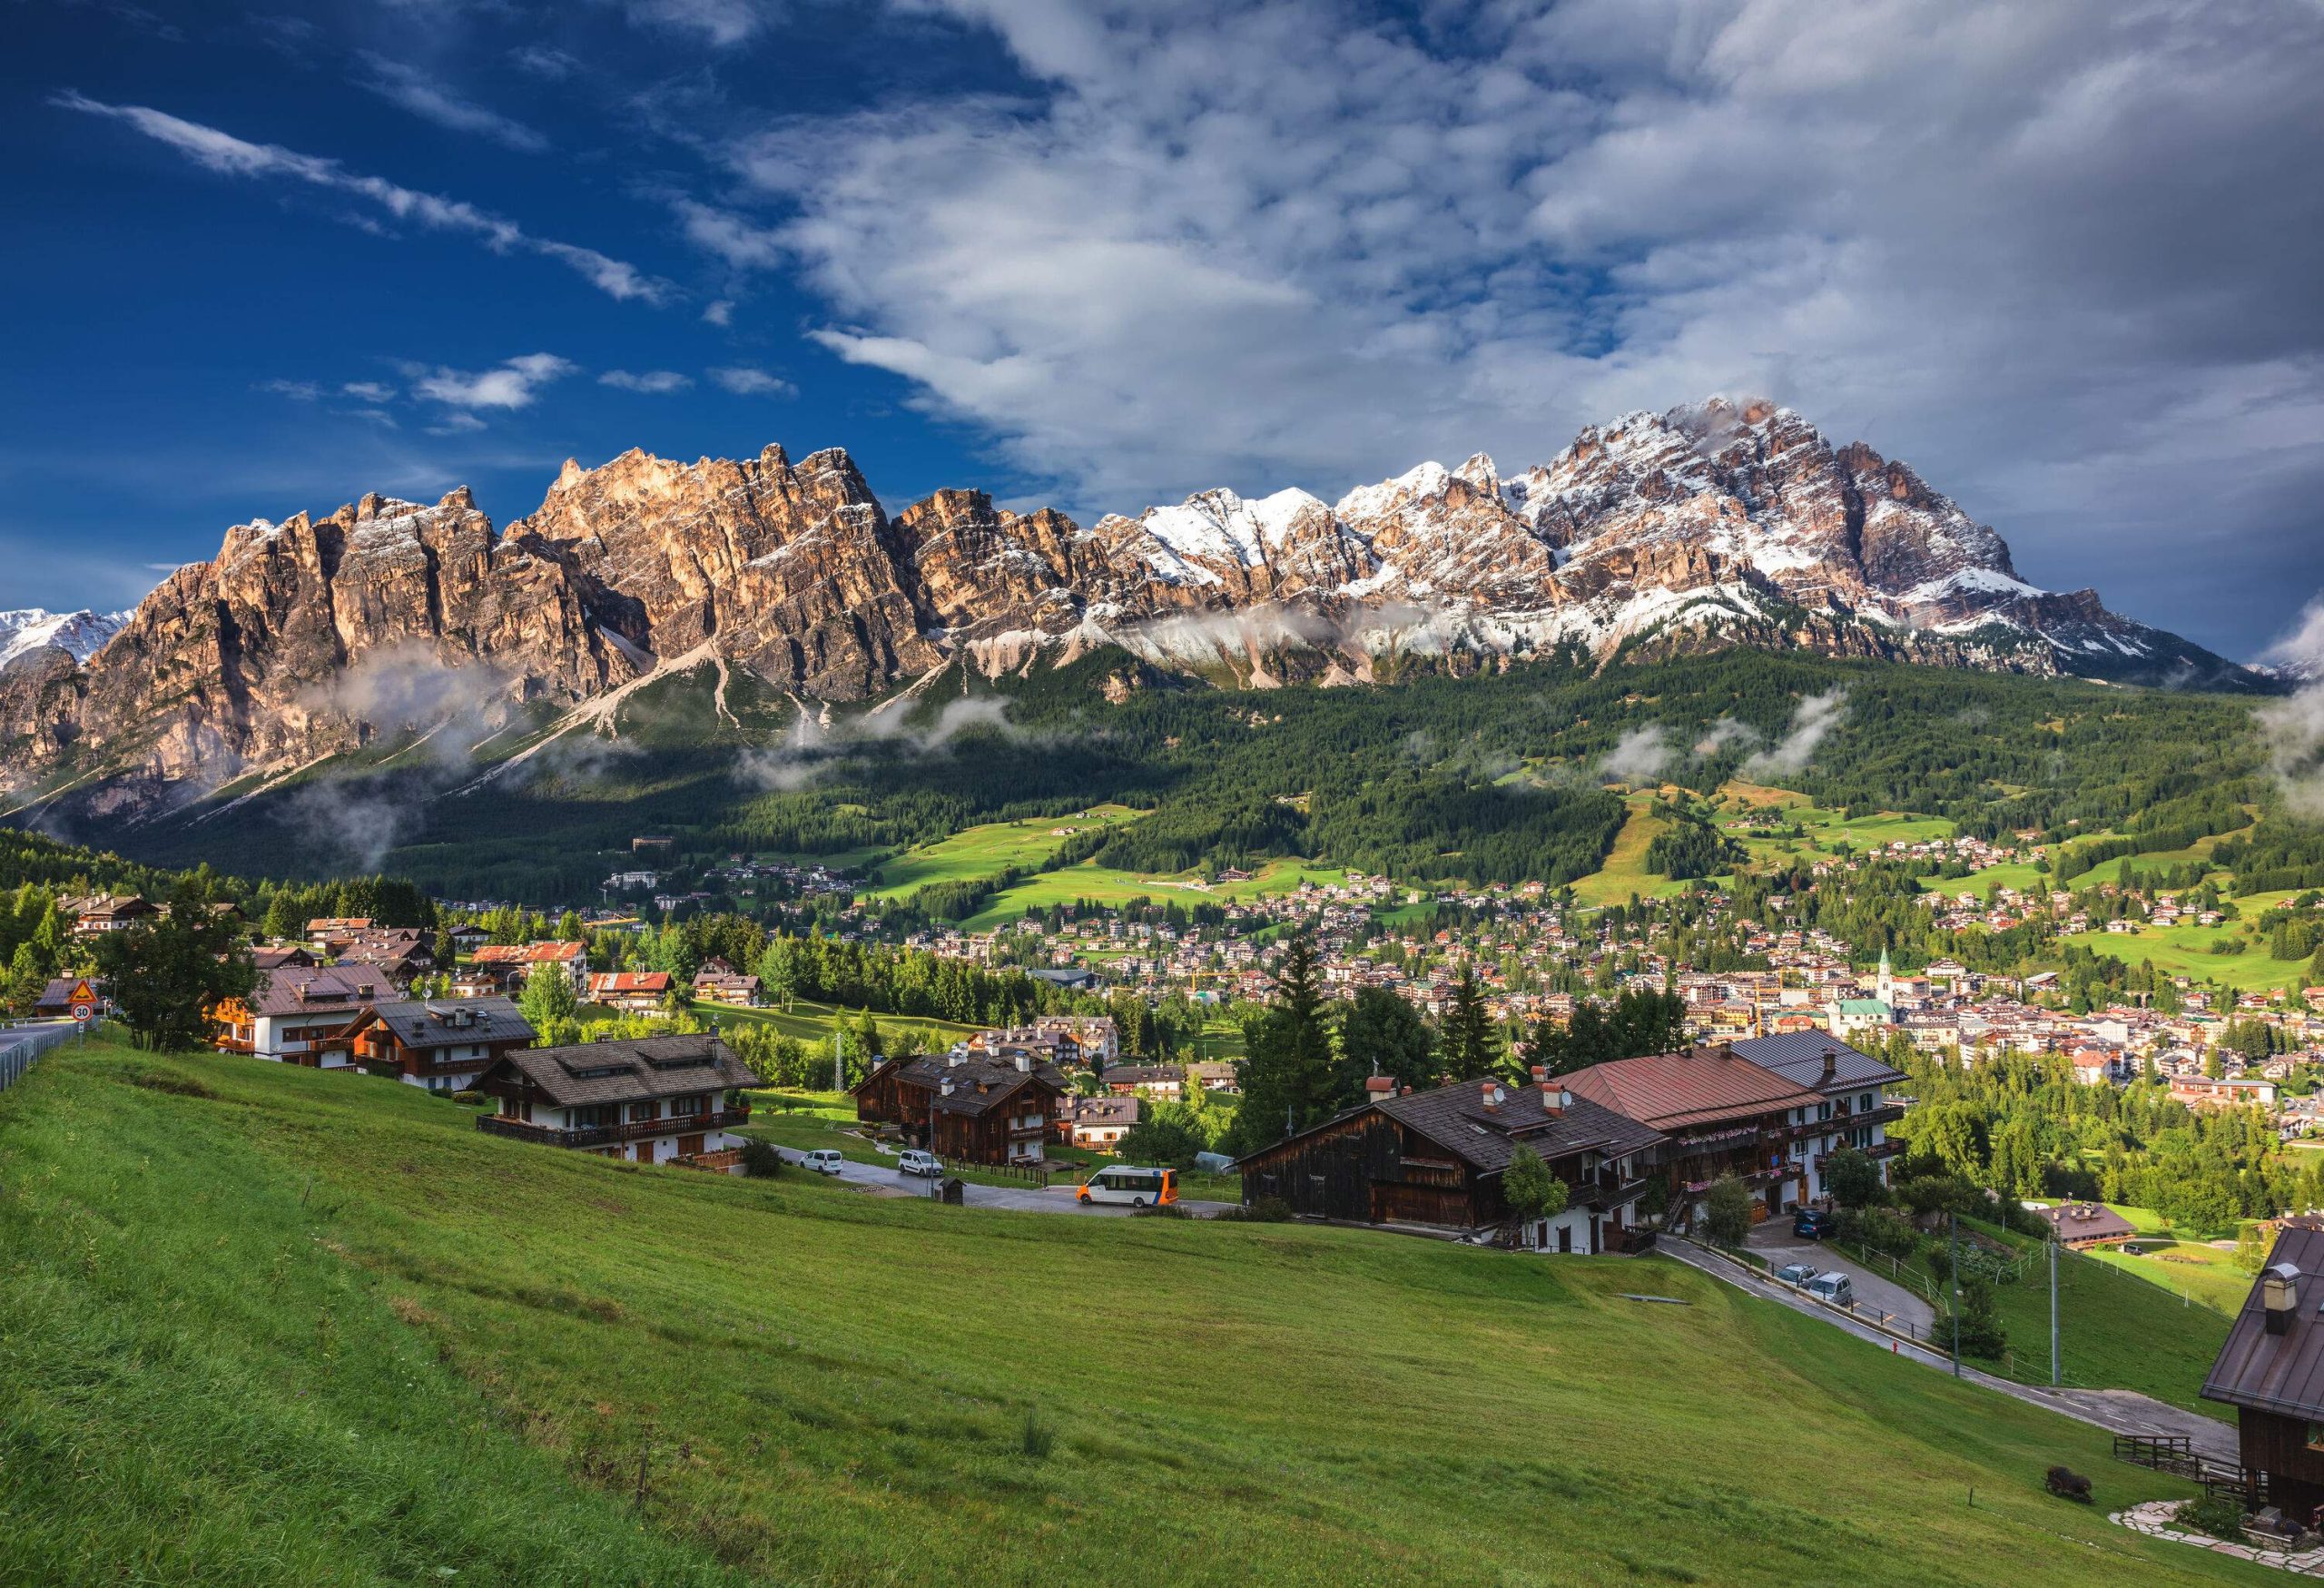 A beautiful resort town with chalet-style houses and villages across the valley in the foothills of the Alps.